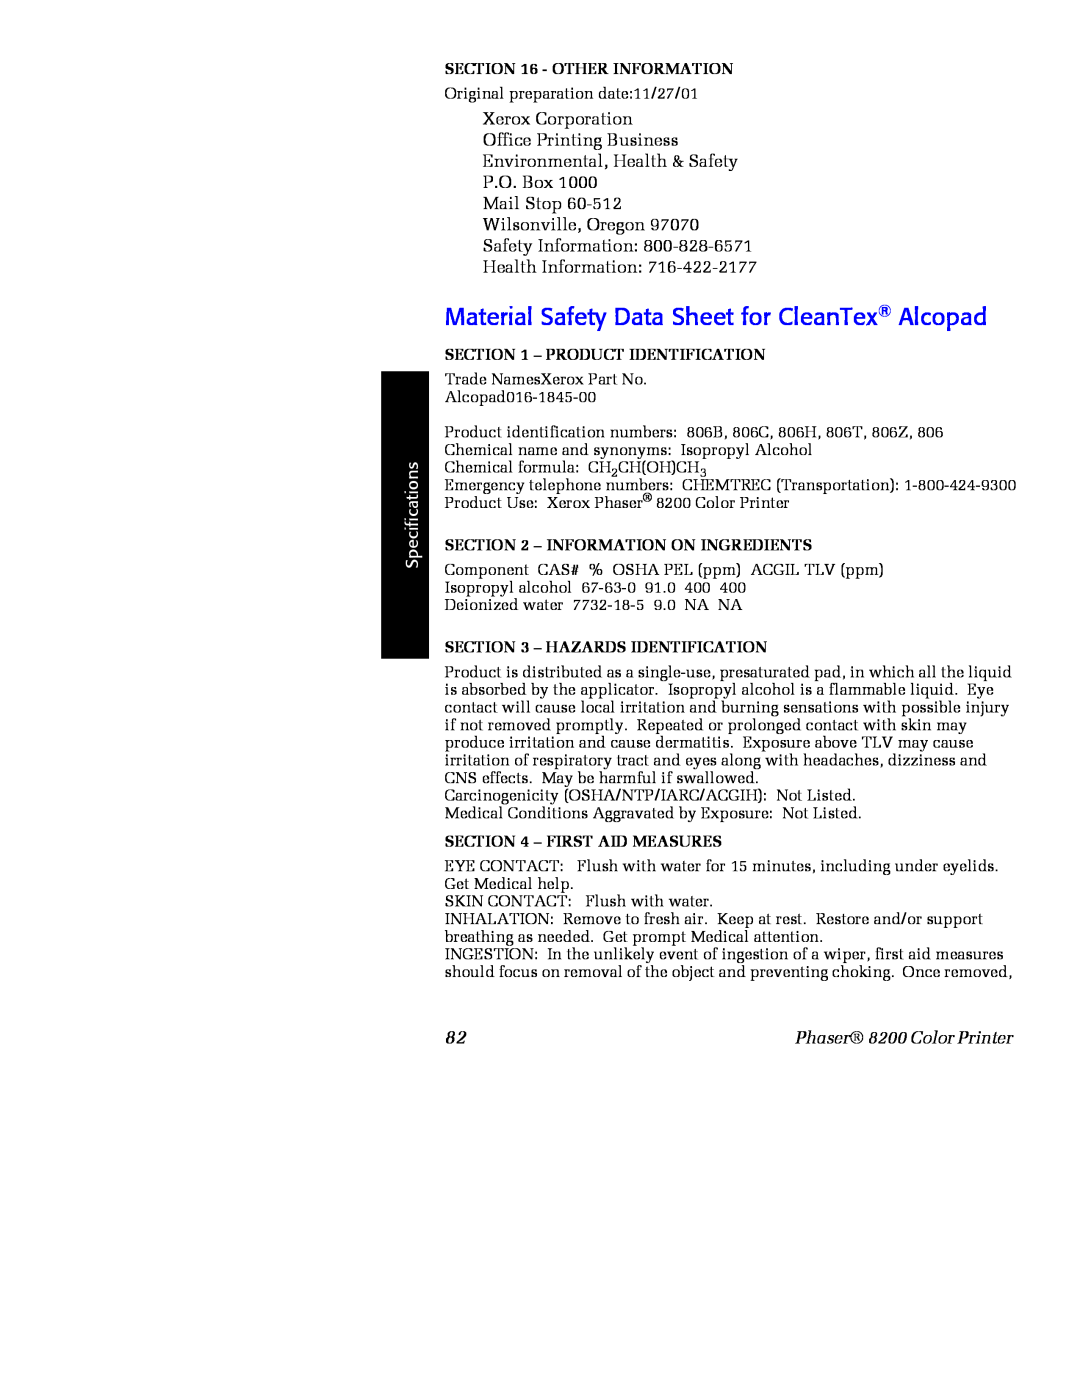 Xerox 016-2042-00, 016-2047-00 Material Safety Data Sheet for CleanTex Alcopad, Product Identification, Specifications 